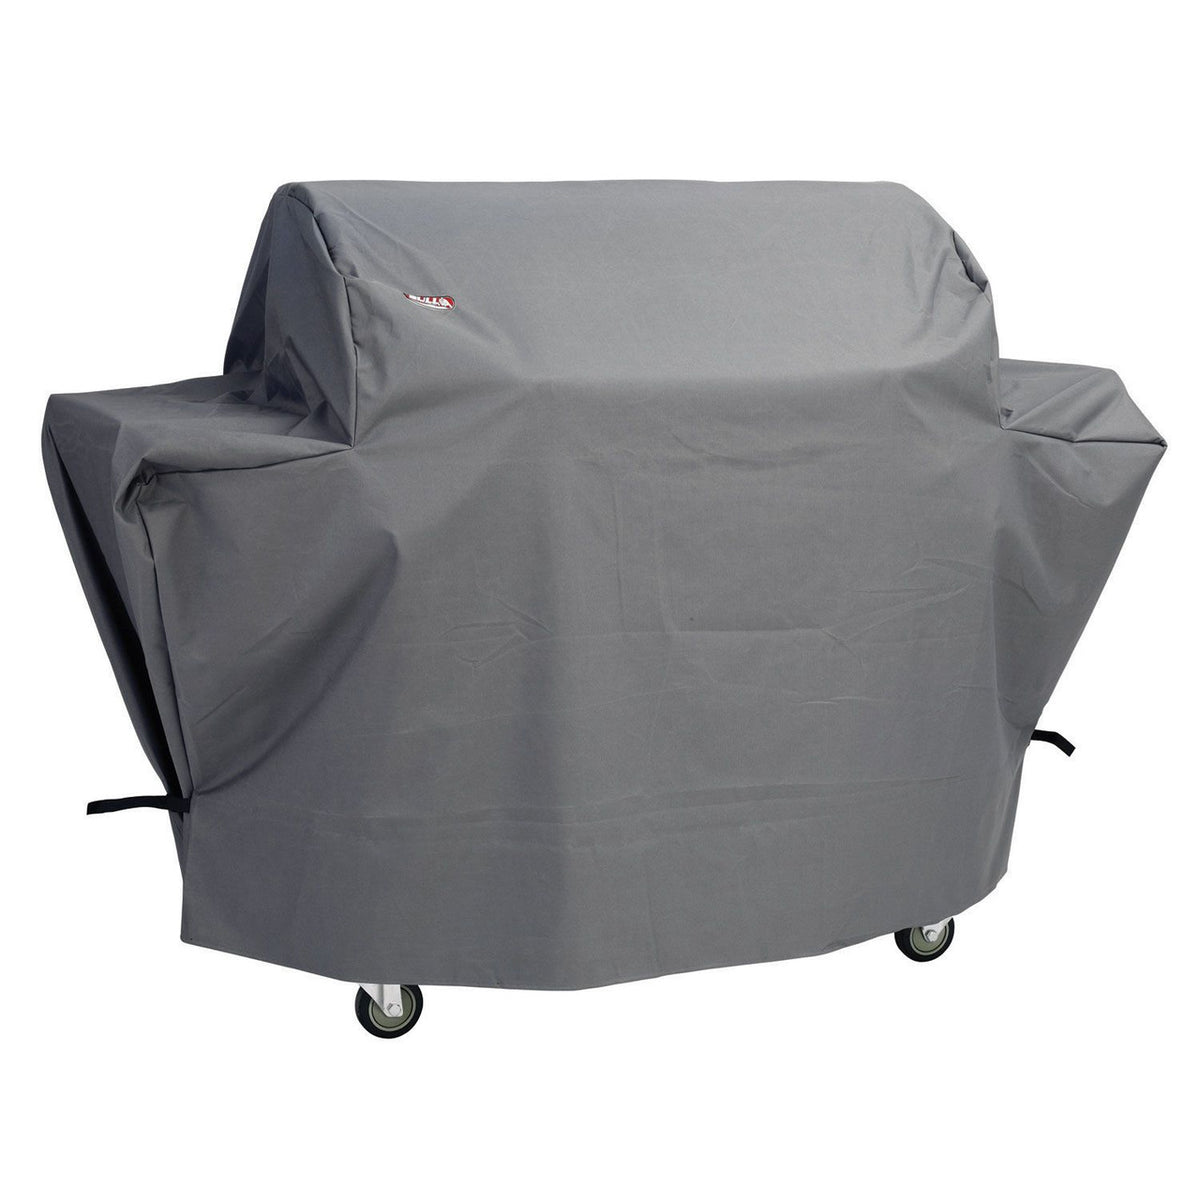 Bull 38 Inch Grill Cart Cover